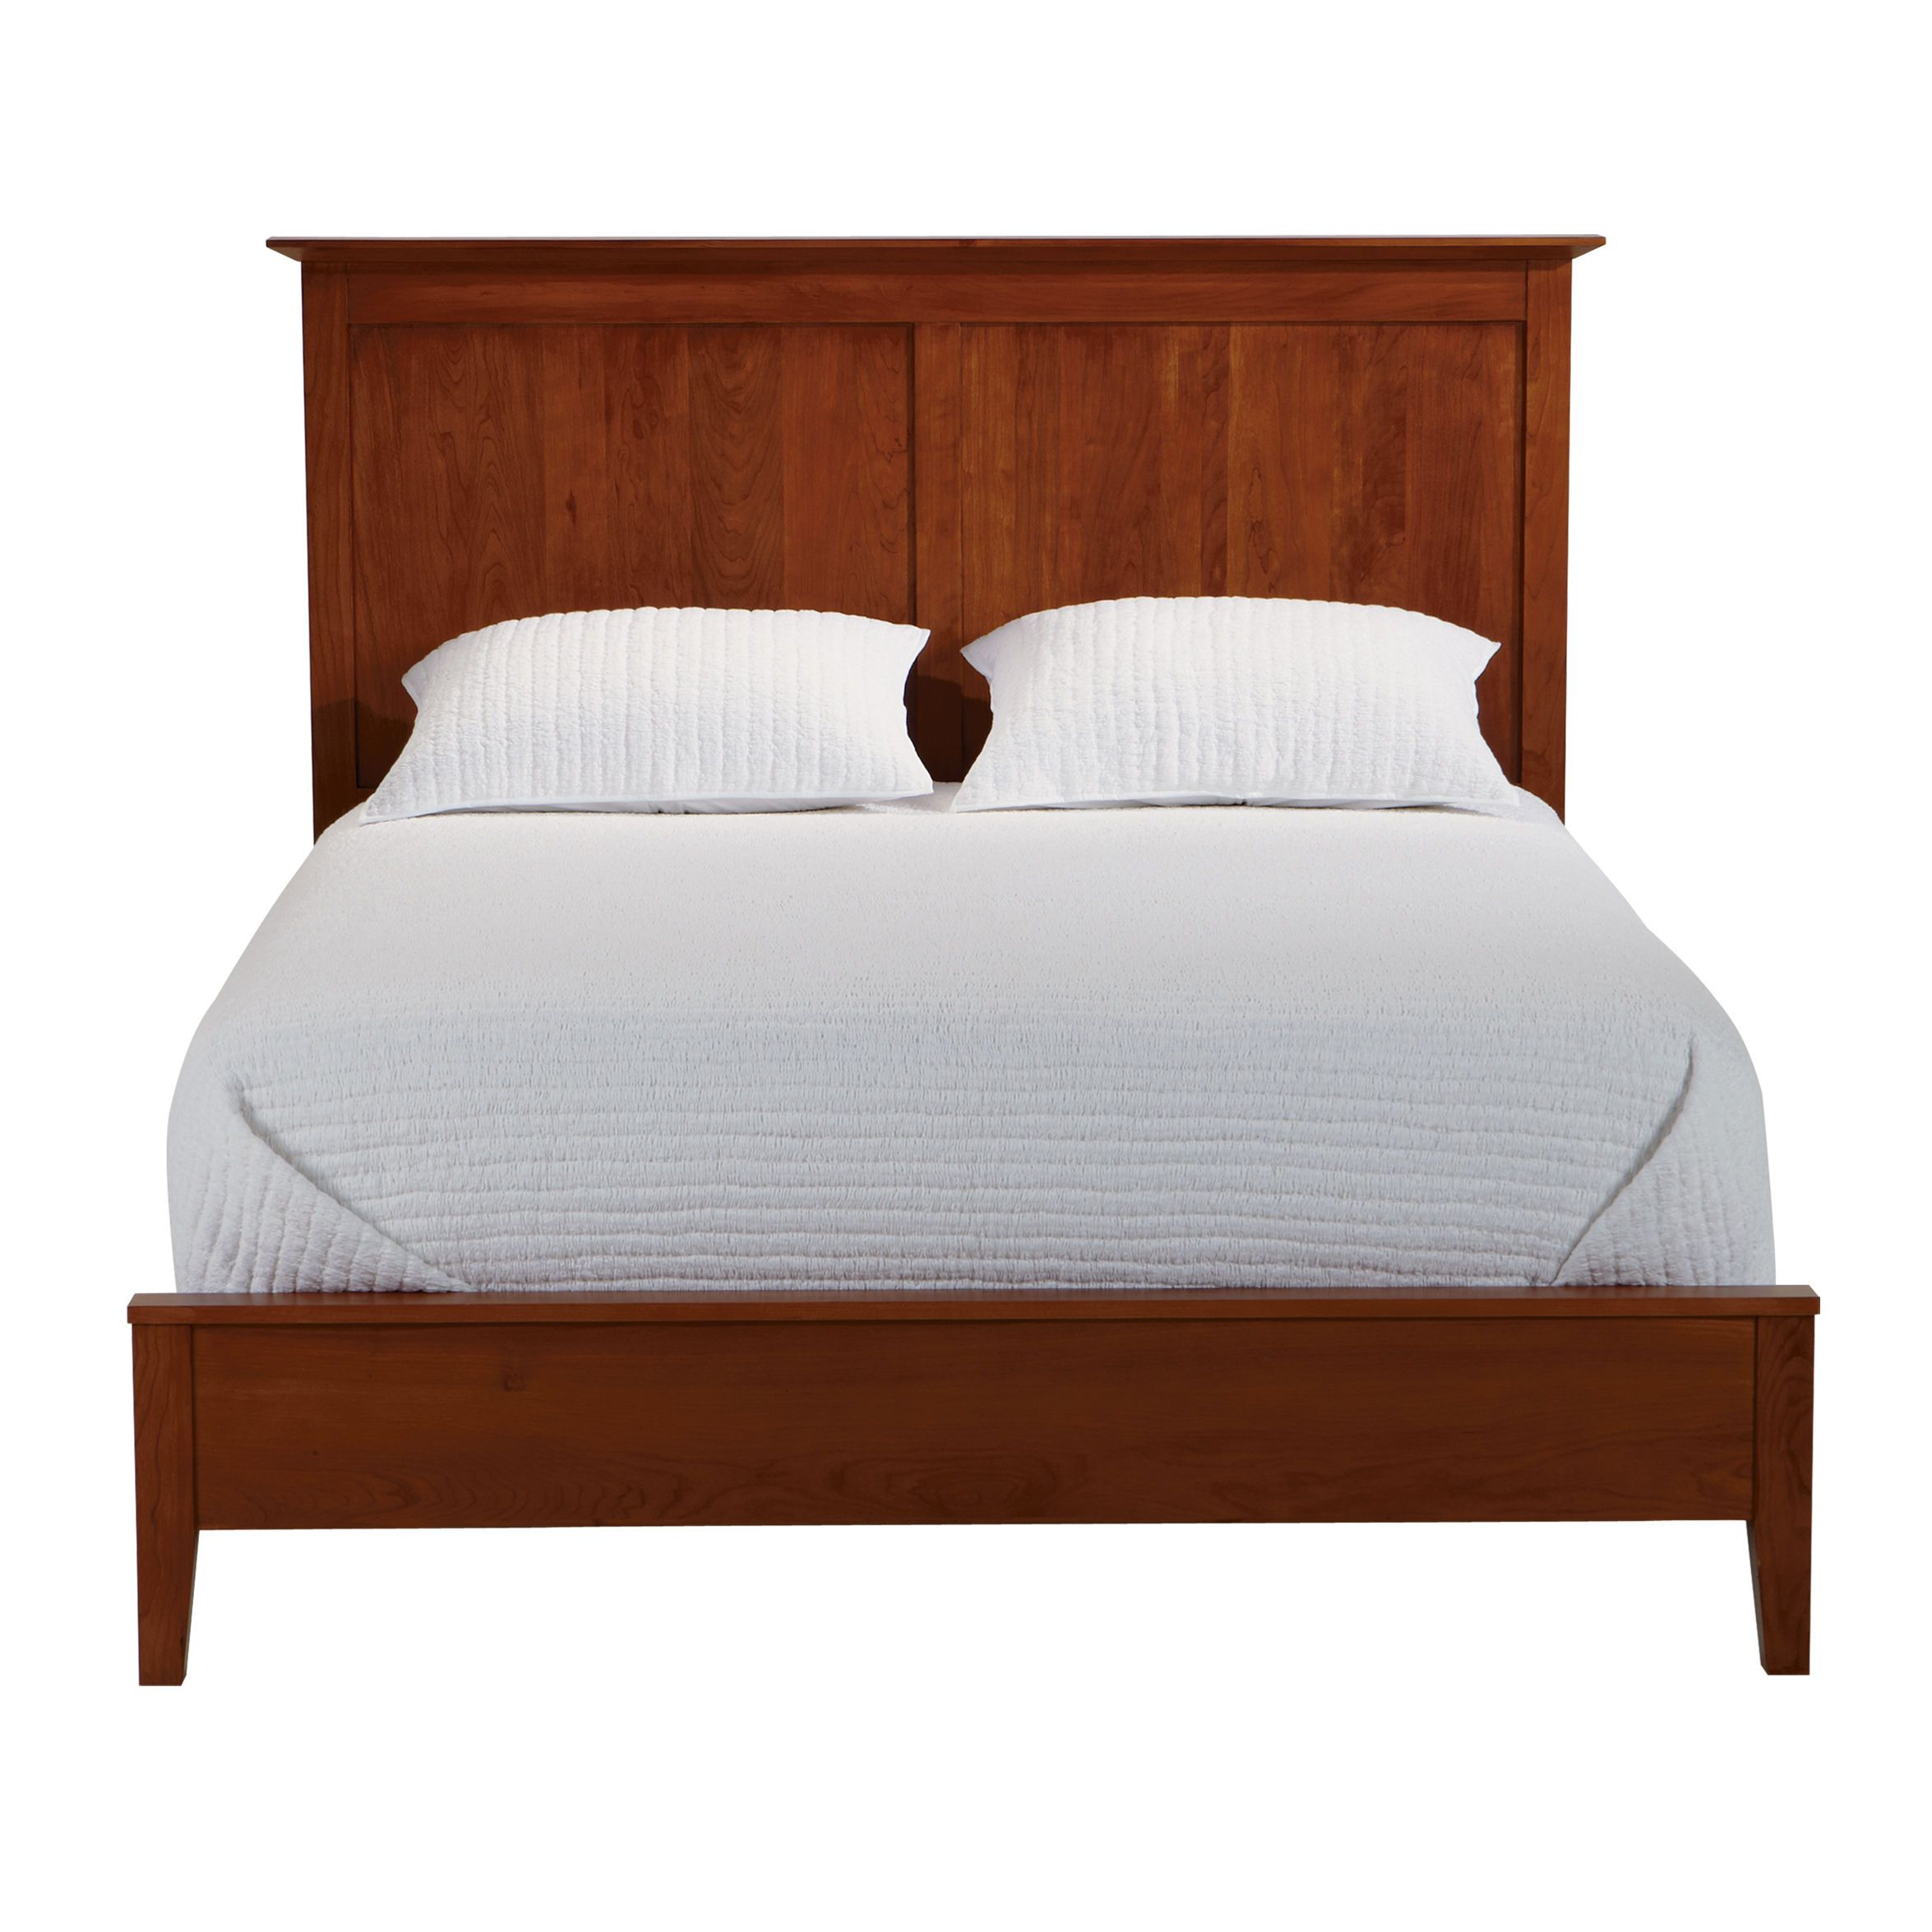 Tatum Bed Ethan Allen Us A Good Option To Go With The Dresser in proportions 2350 X 2350